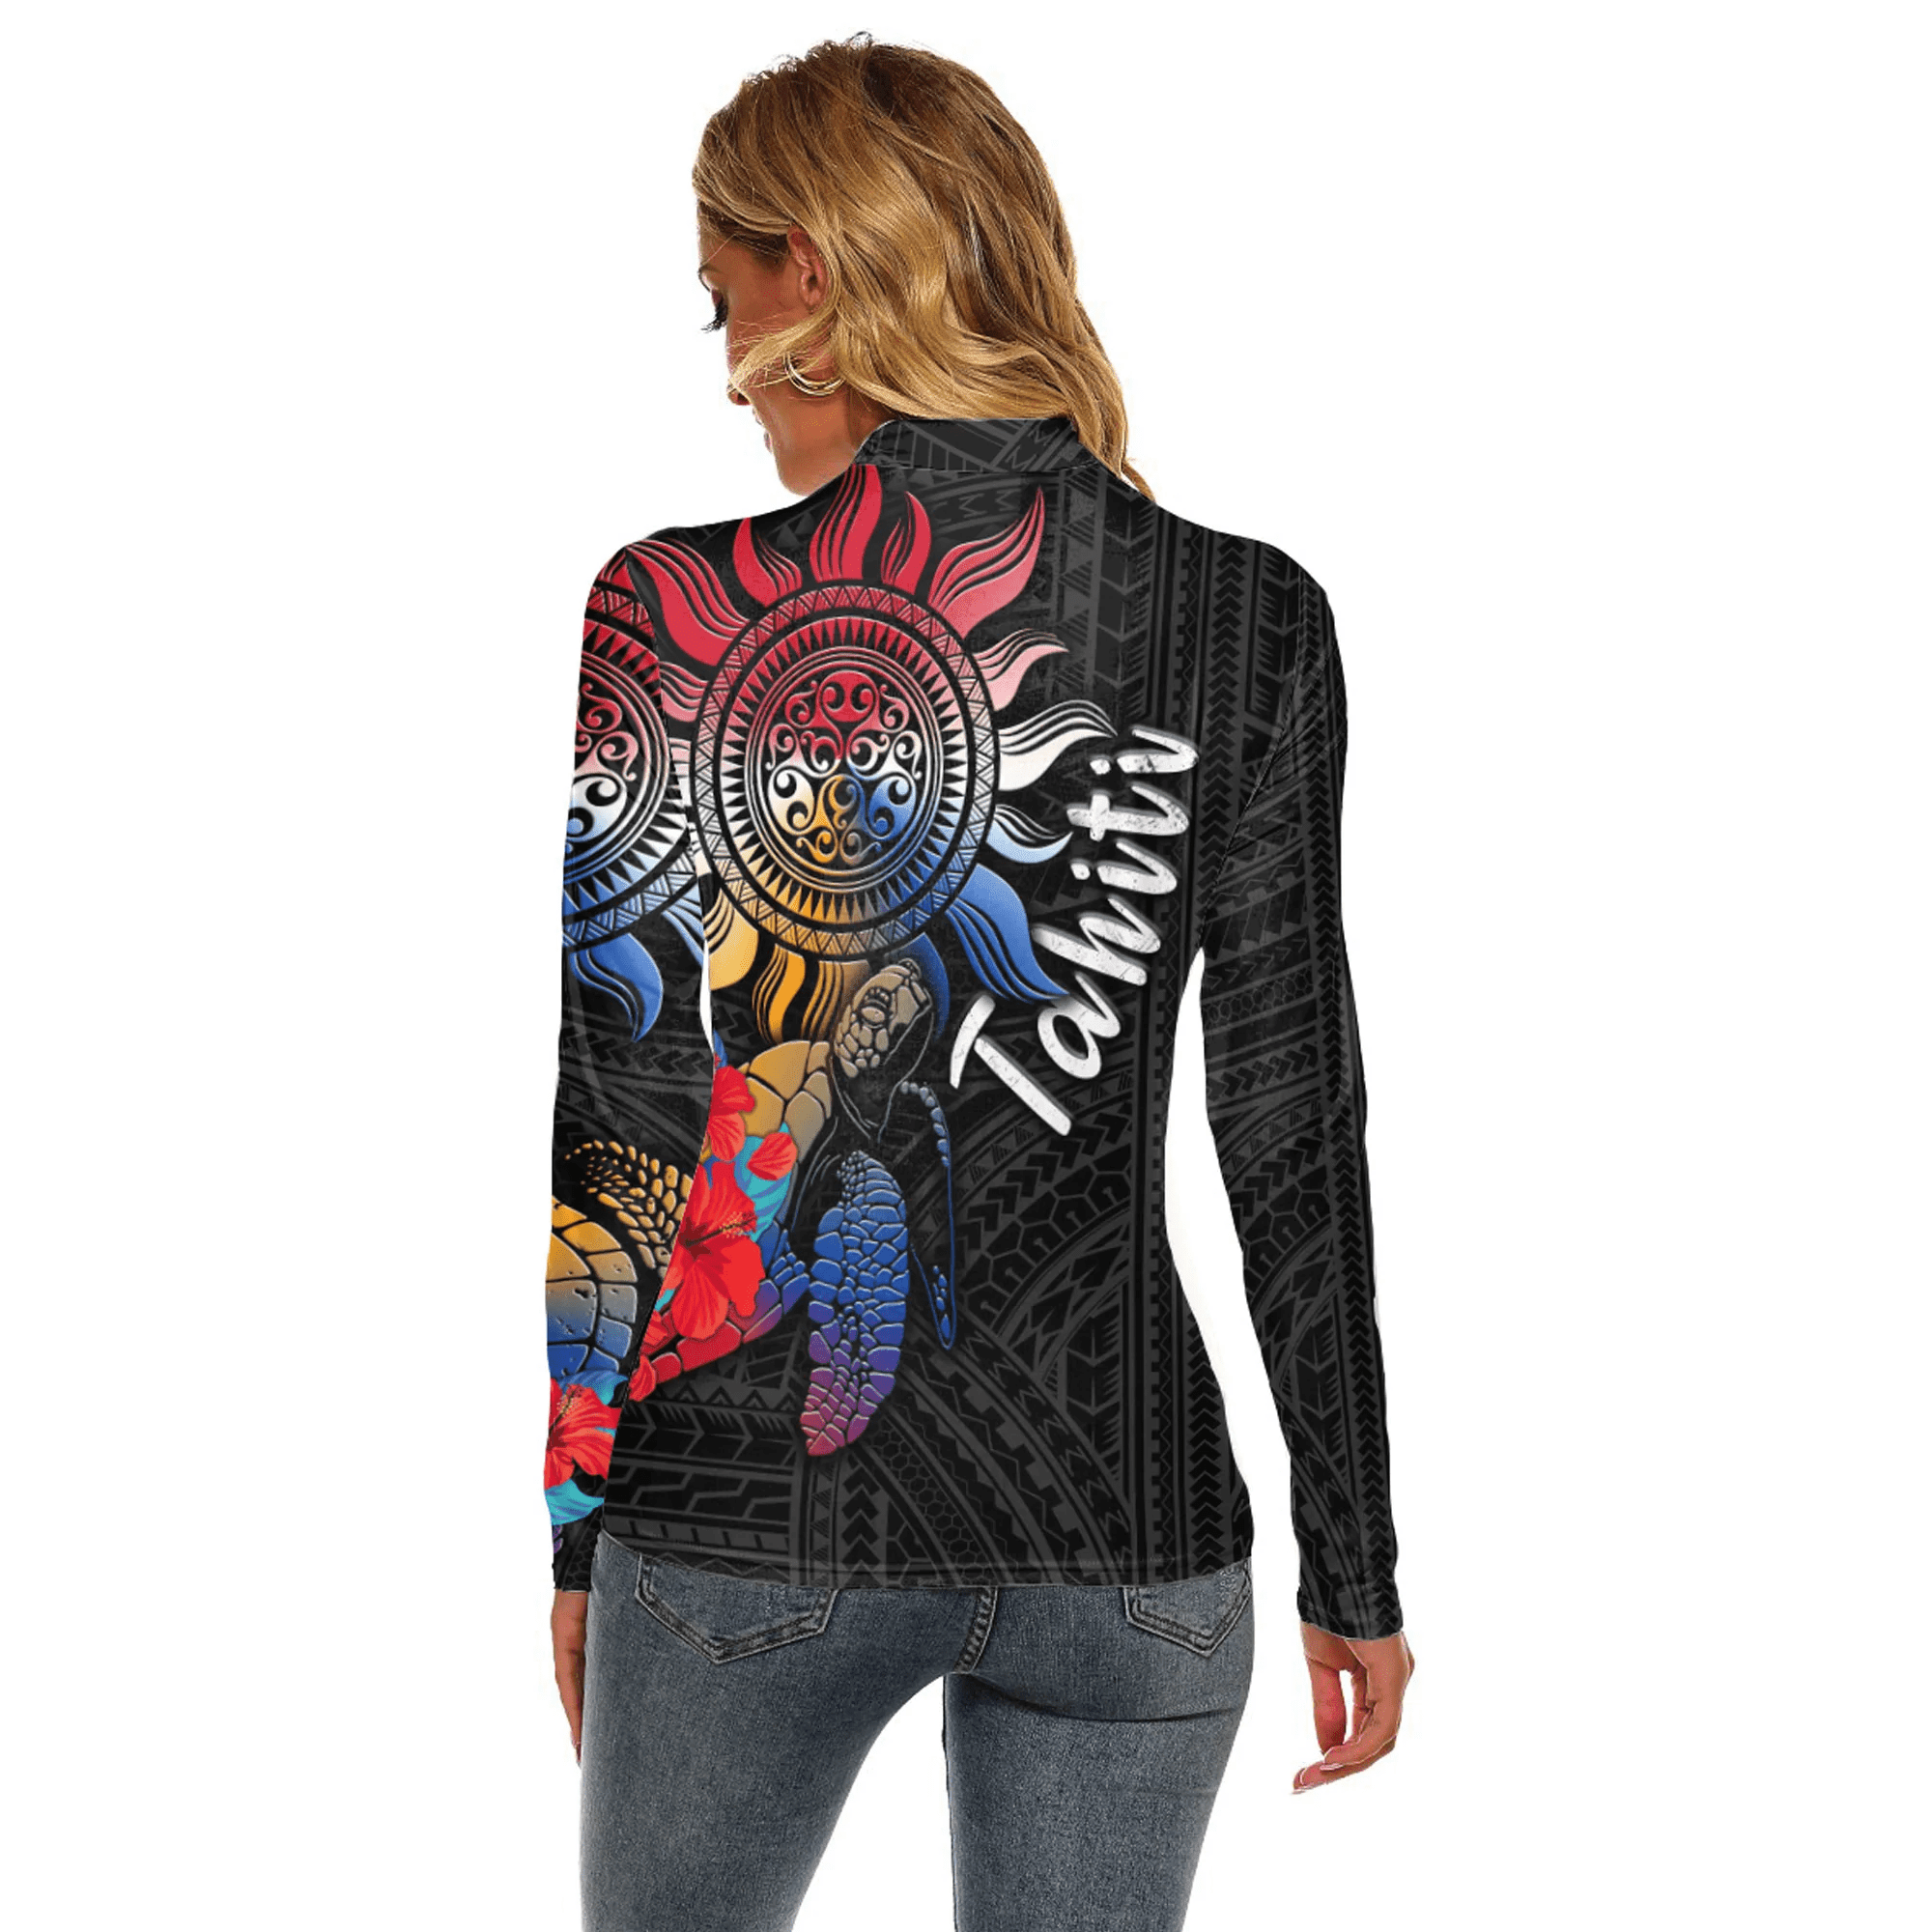 New Caledonia Polynesian Sun and Turtle Tattoo Women's Stretchable Turtleneck Top A35 | Love New Zealand